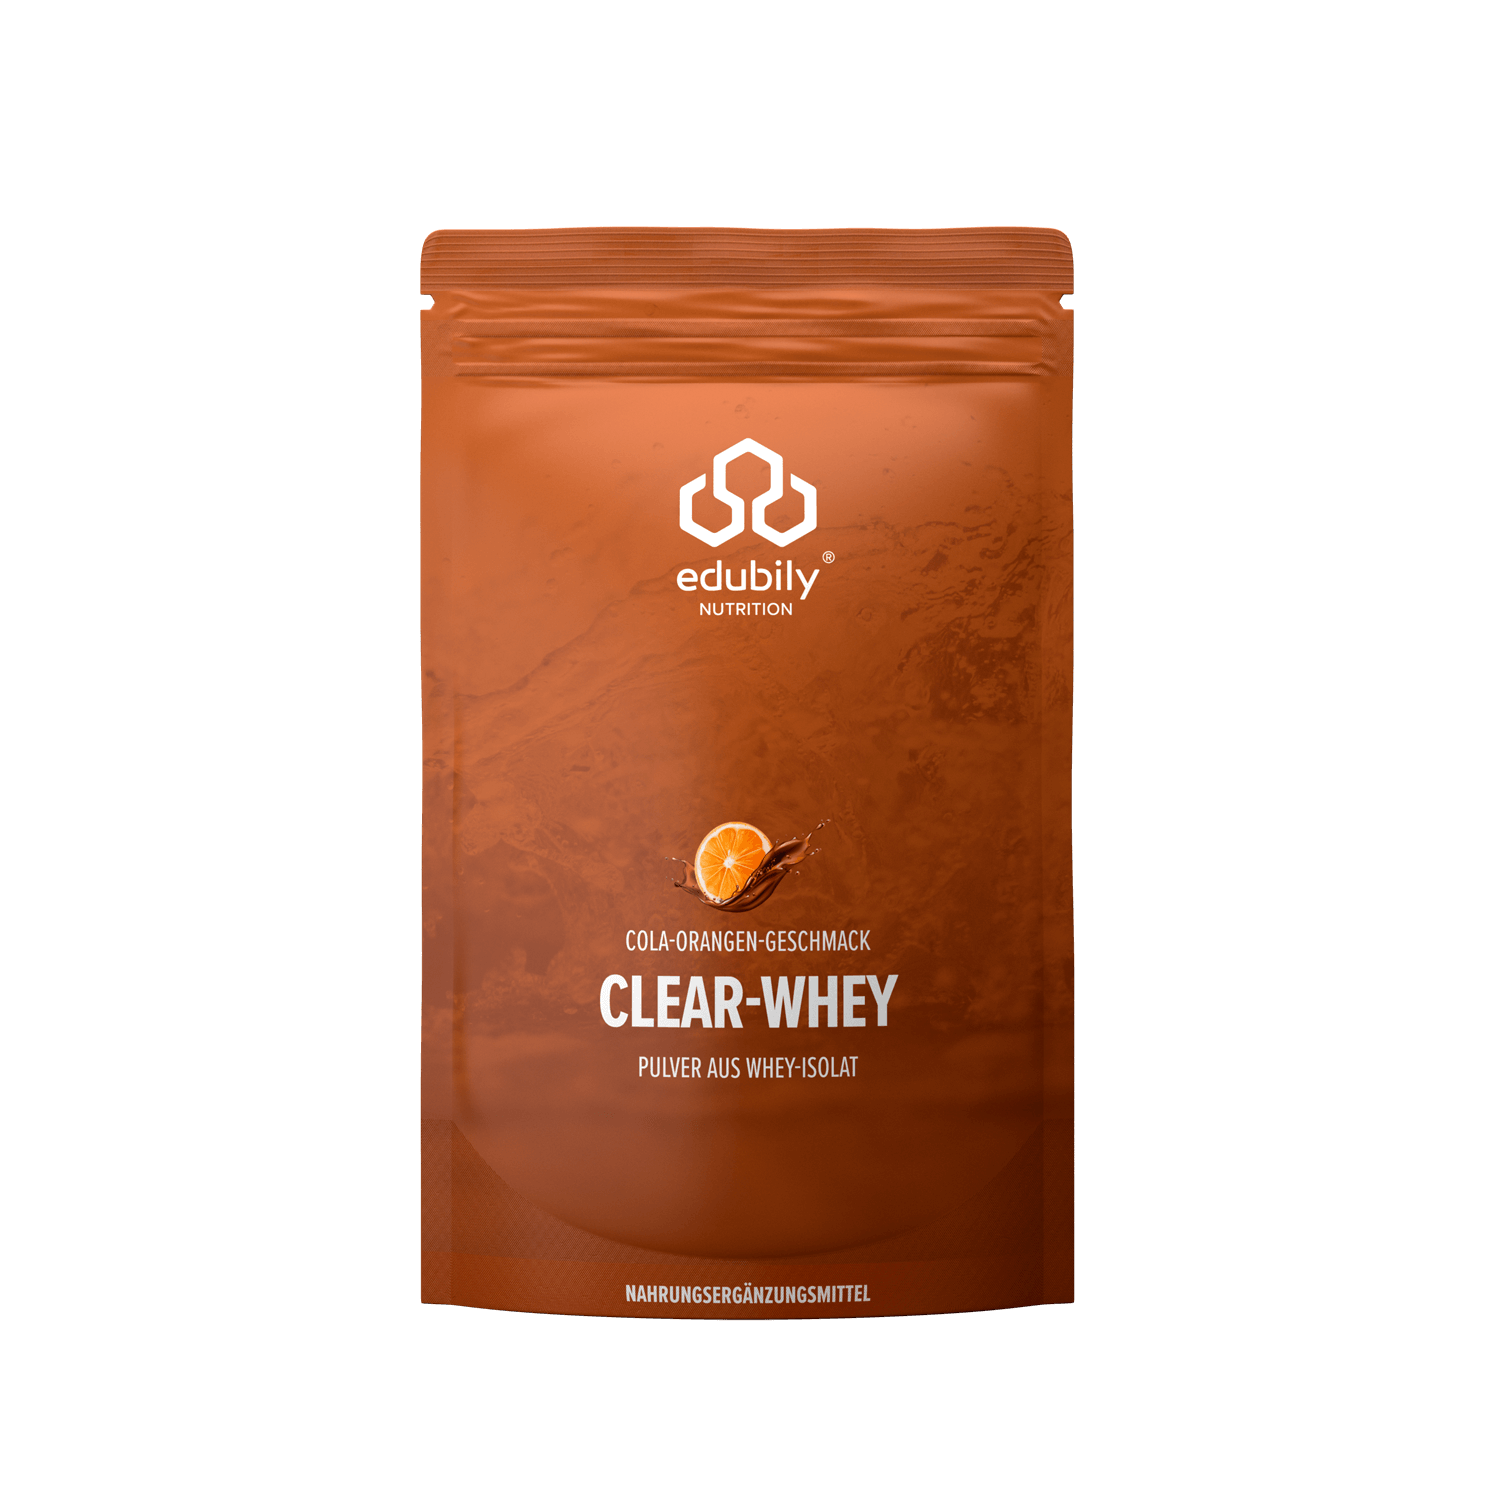 Clear Whey - Pulver aus Whey-Isolat